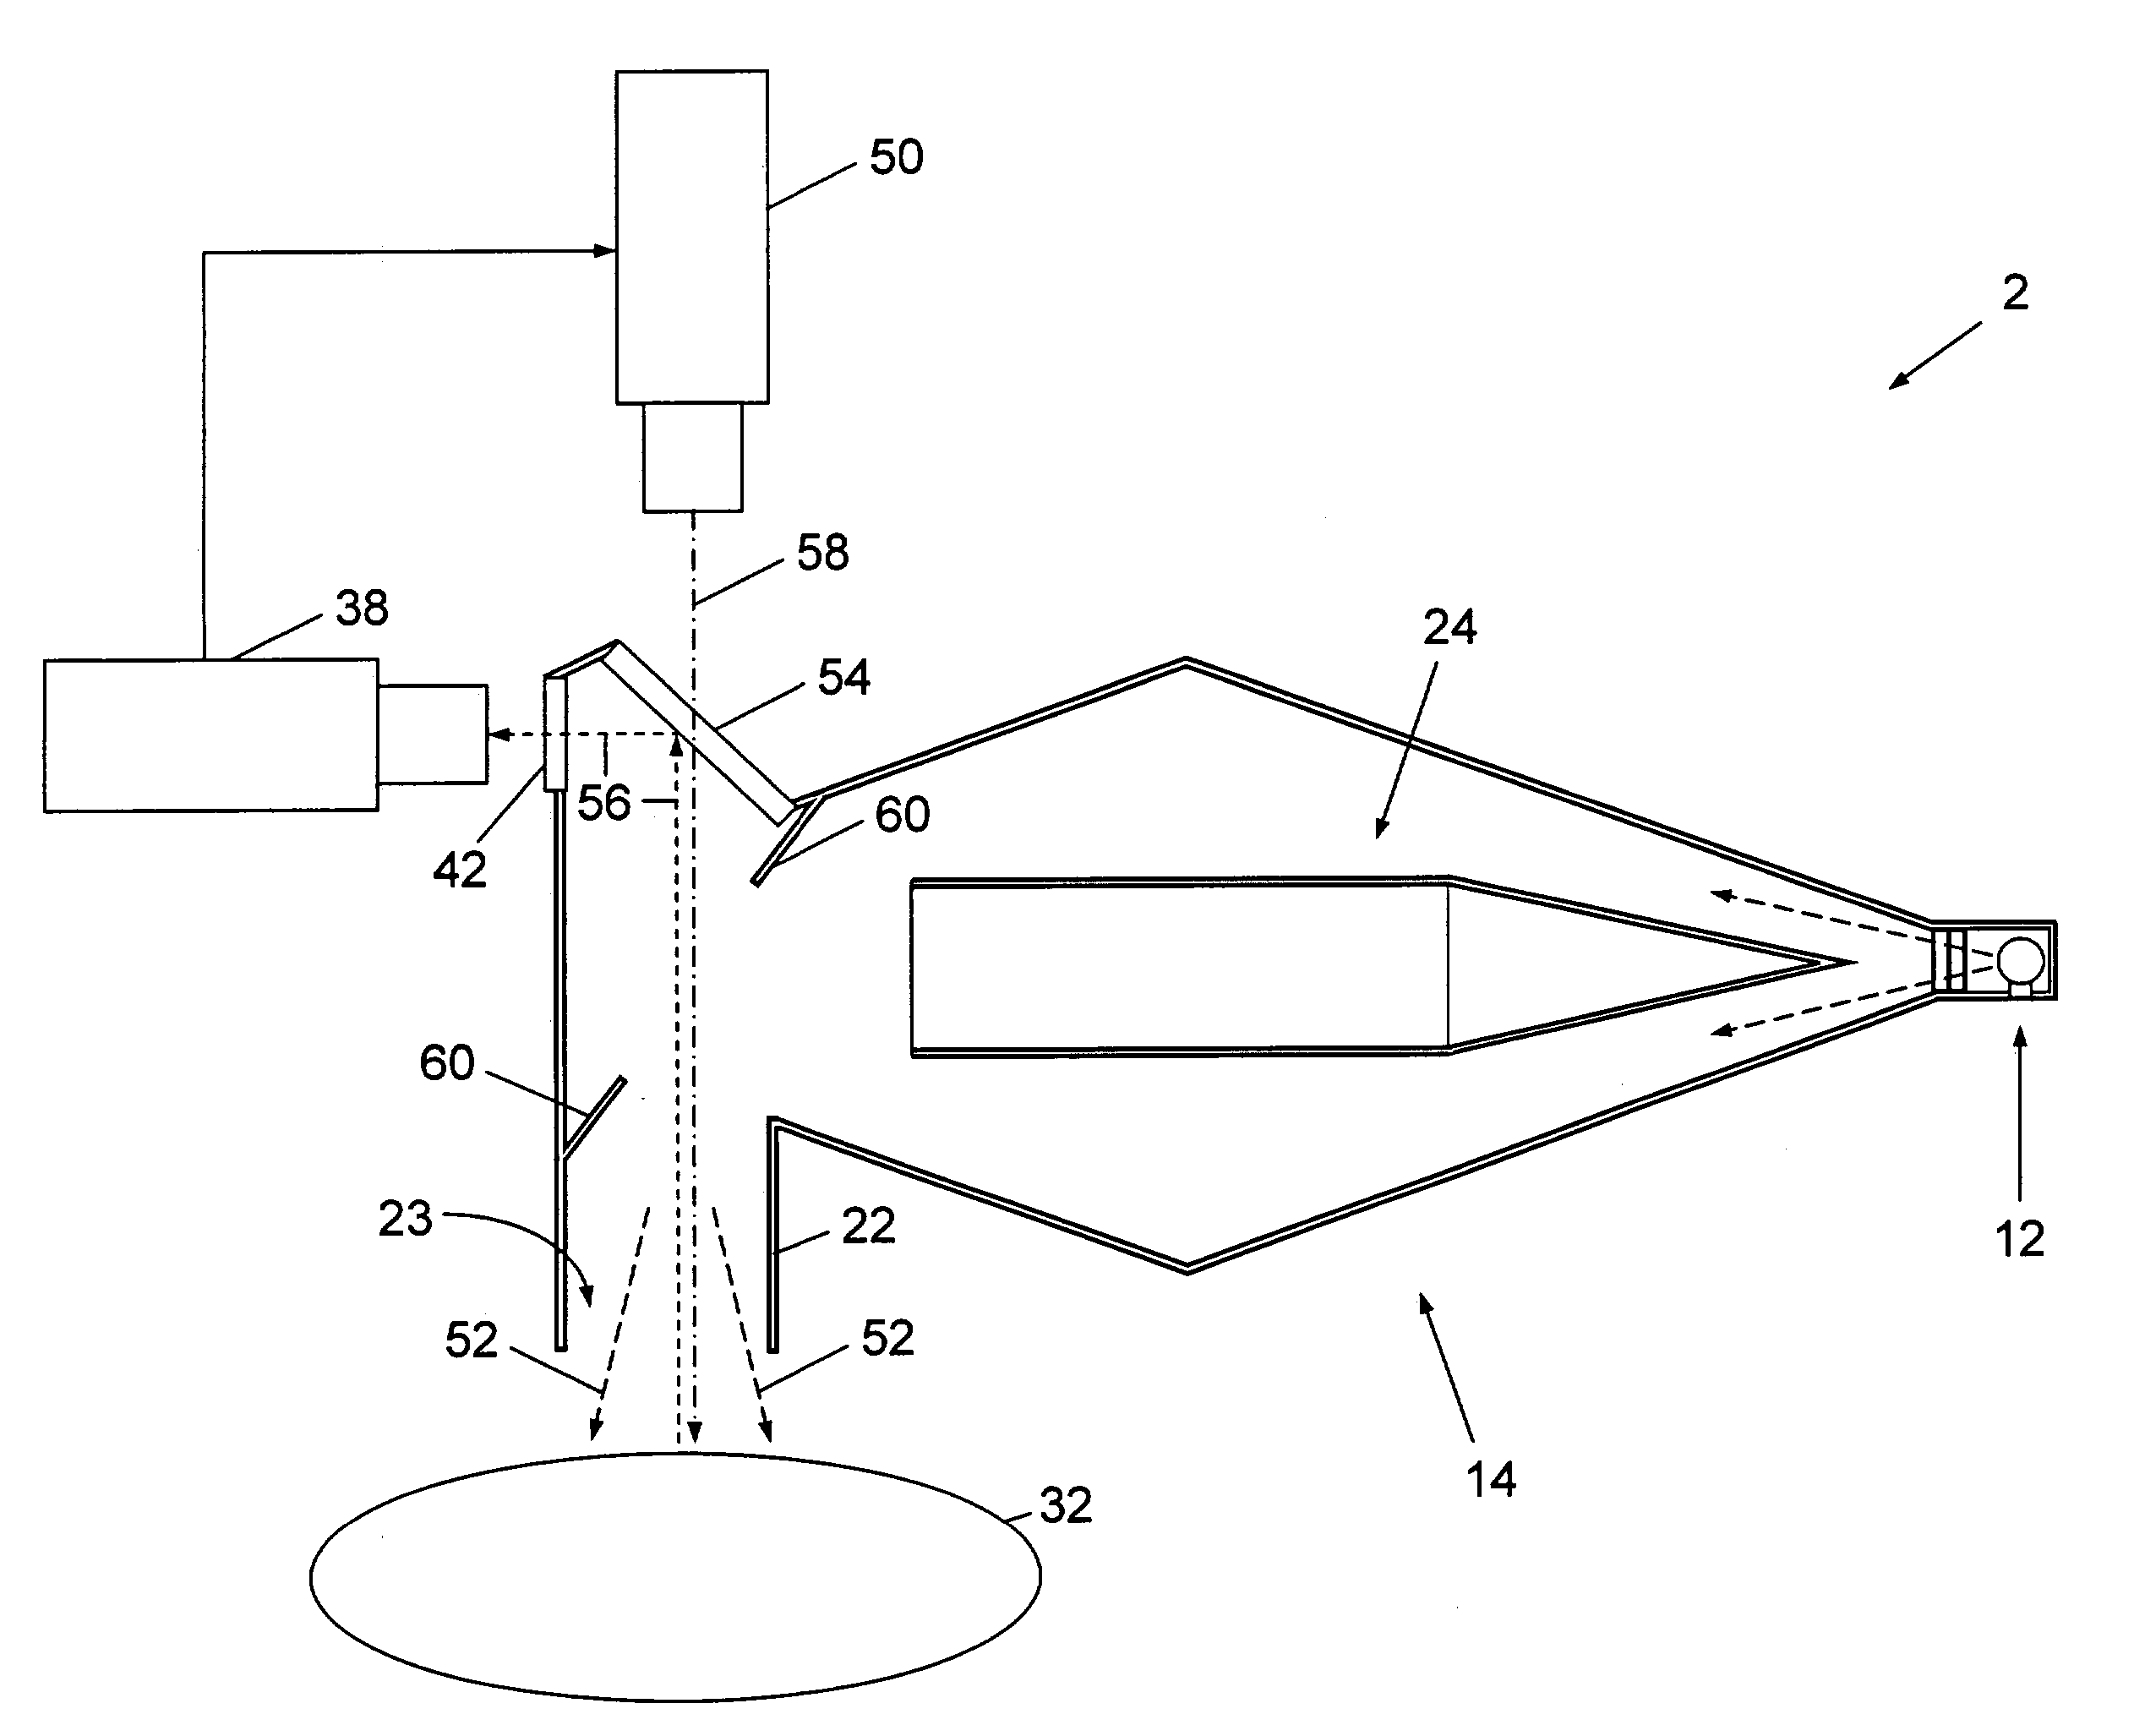 Imaging system using diffuse infrared light